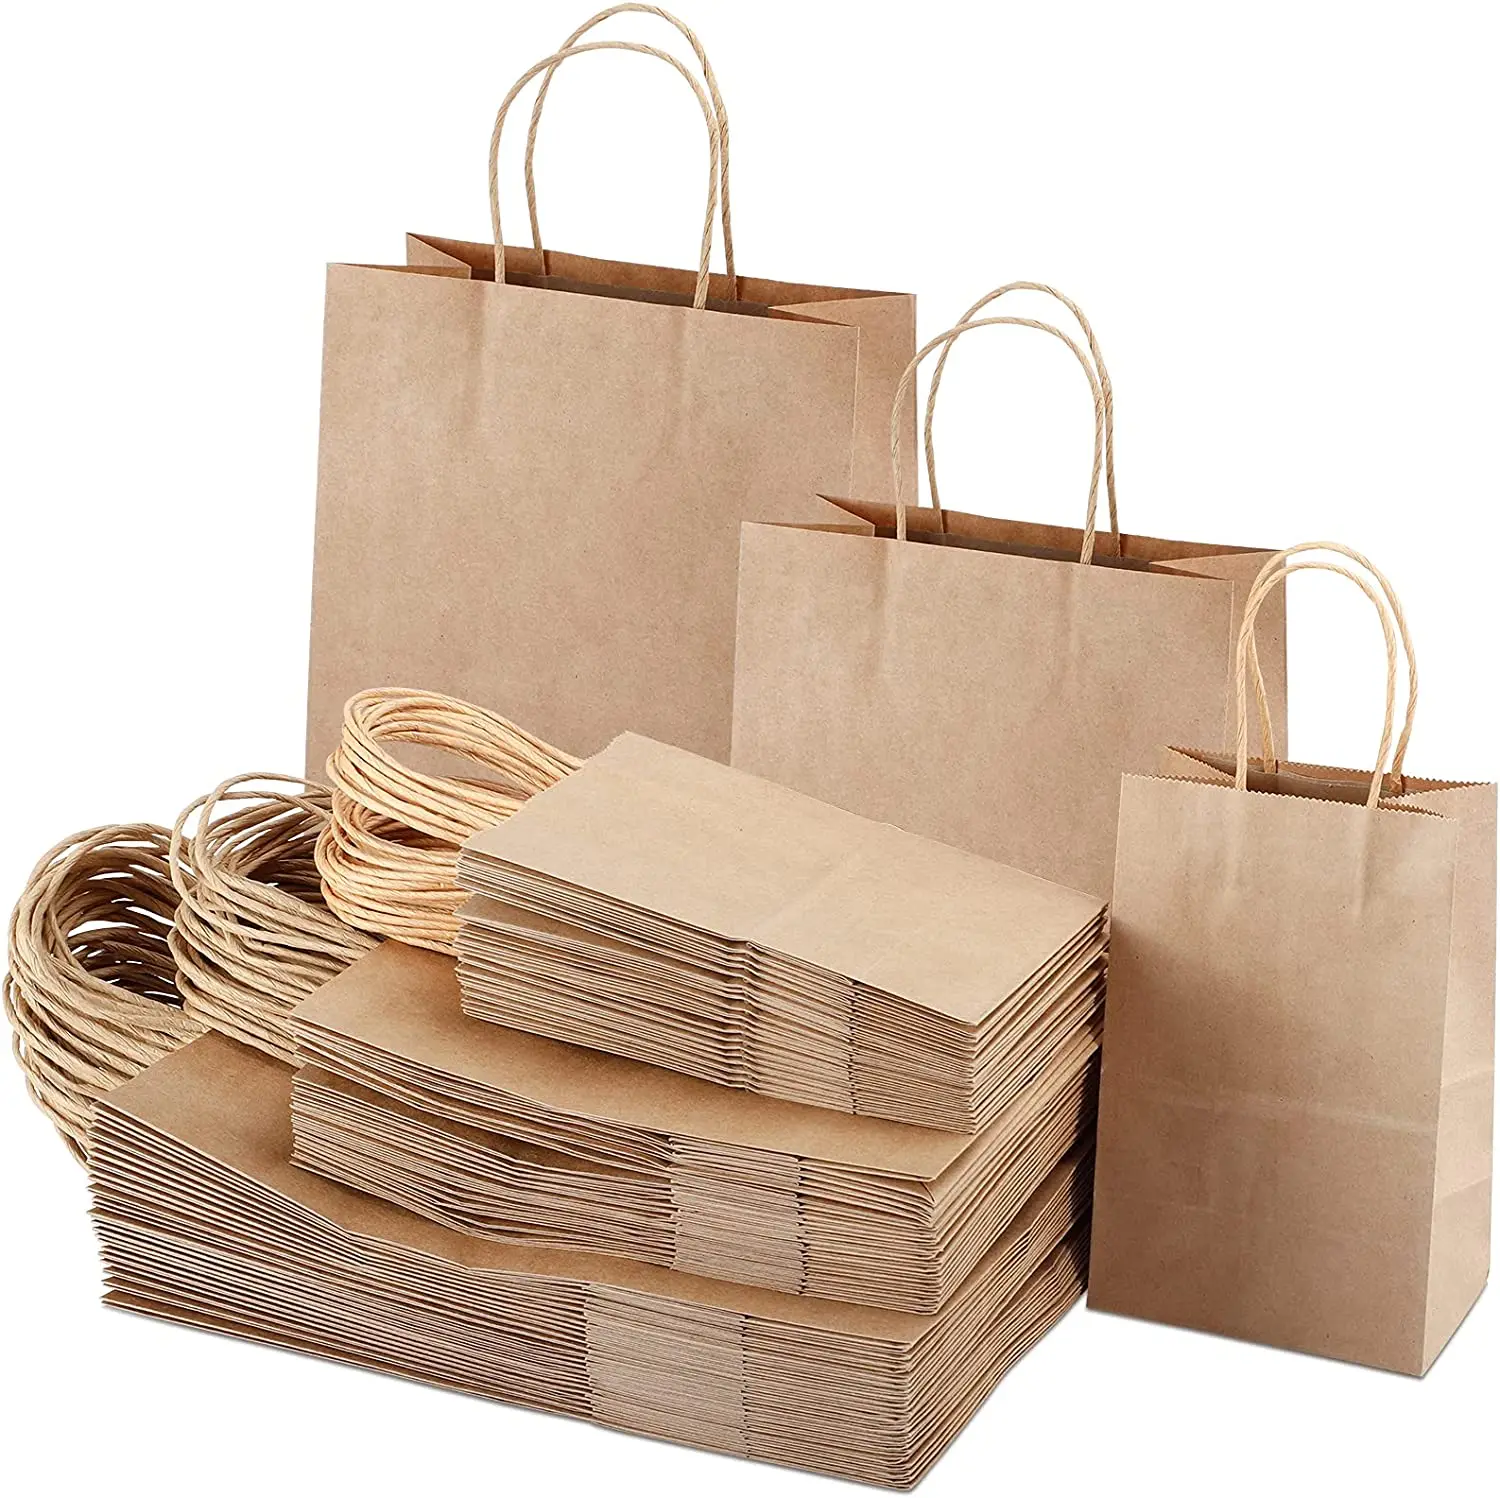 Kraft Paper Gift Bags With Handles 10/20/25/30/50/100PCS Shopping Carry Craft Brown White Bag DIY Bag Party Festive Supplies